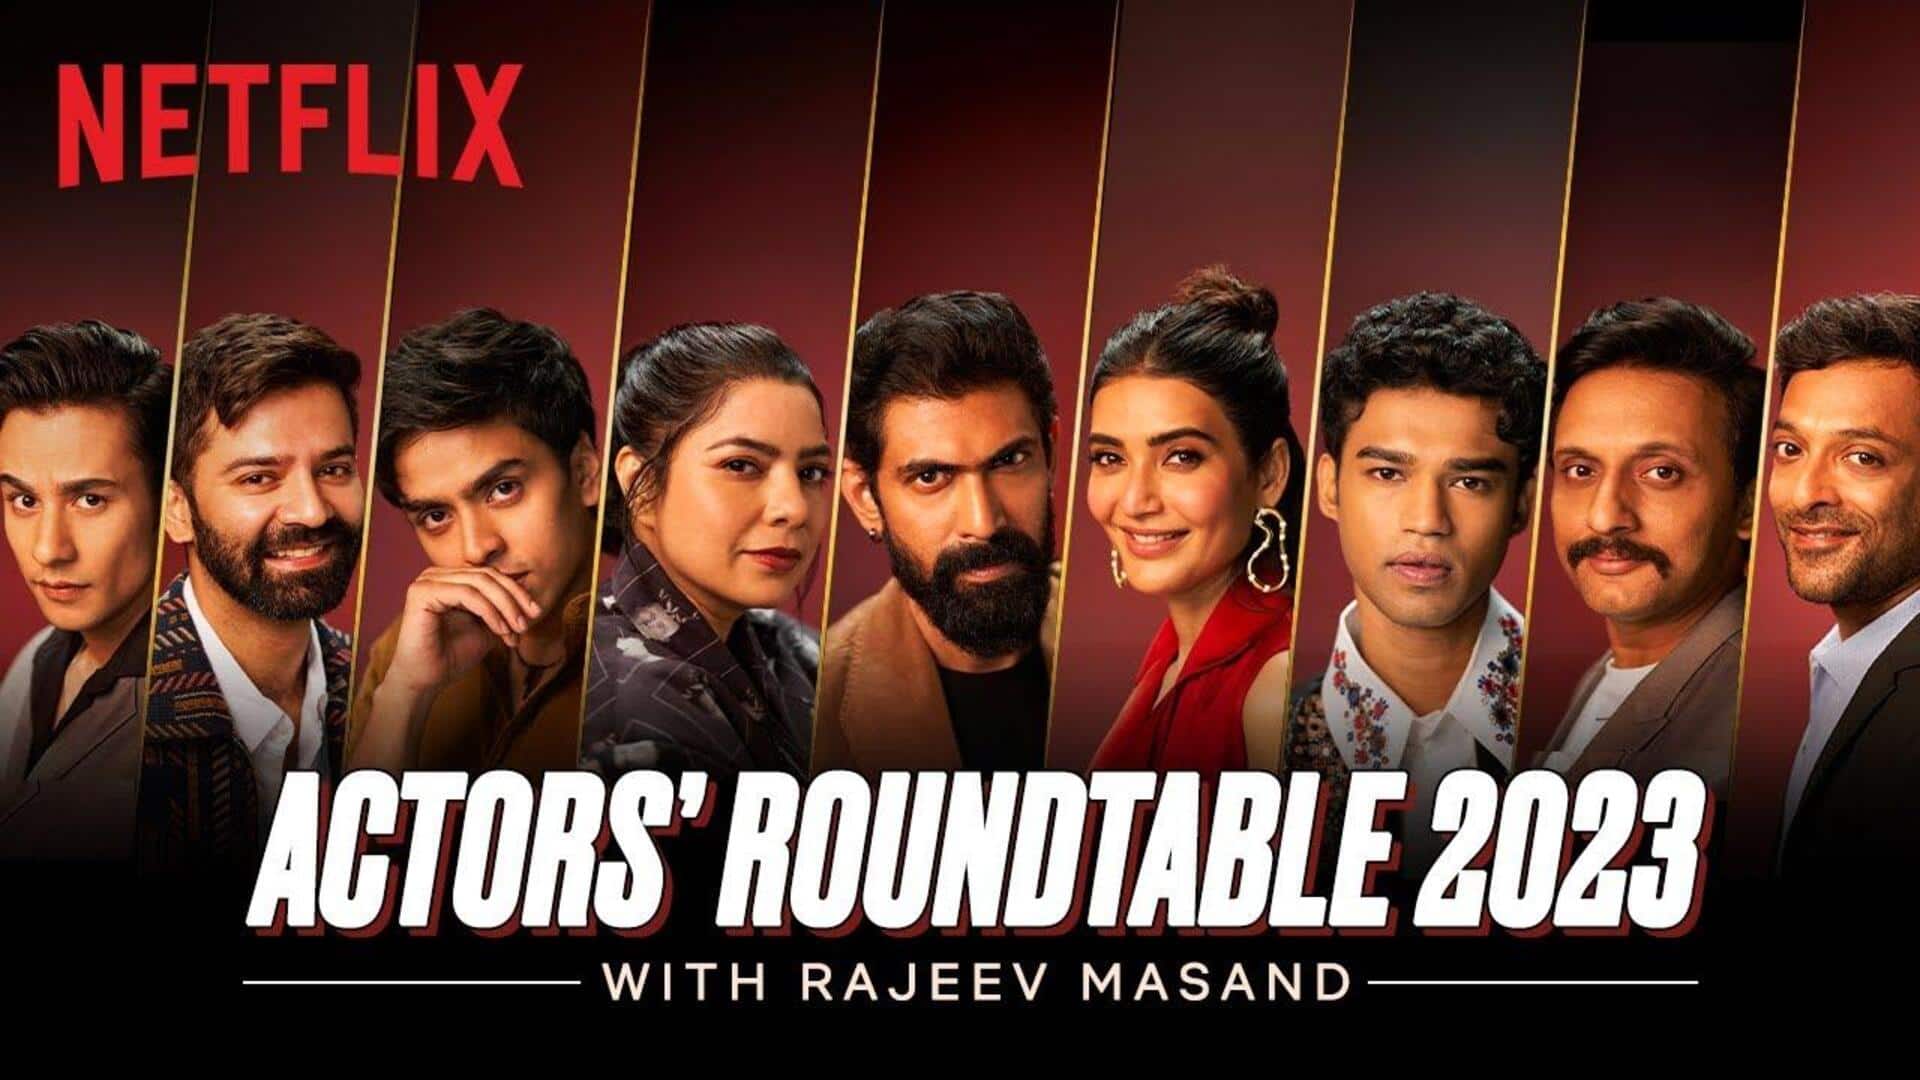 Explainer: Decoding the tradition of roundtables in Hollywood and Bollywood 